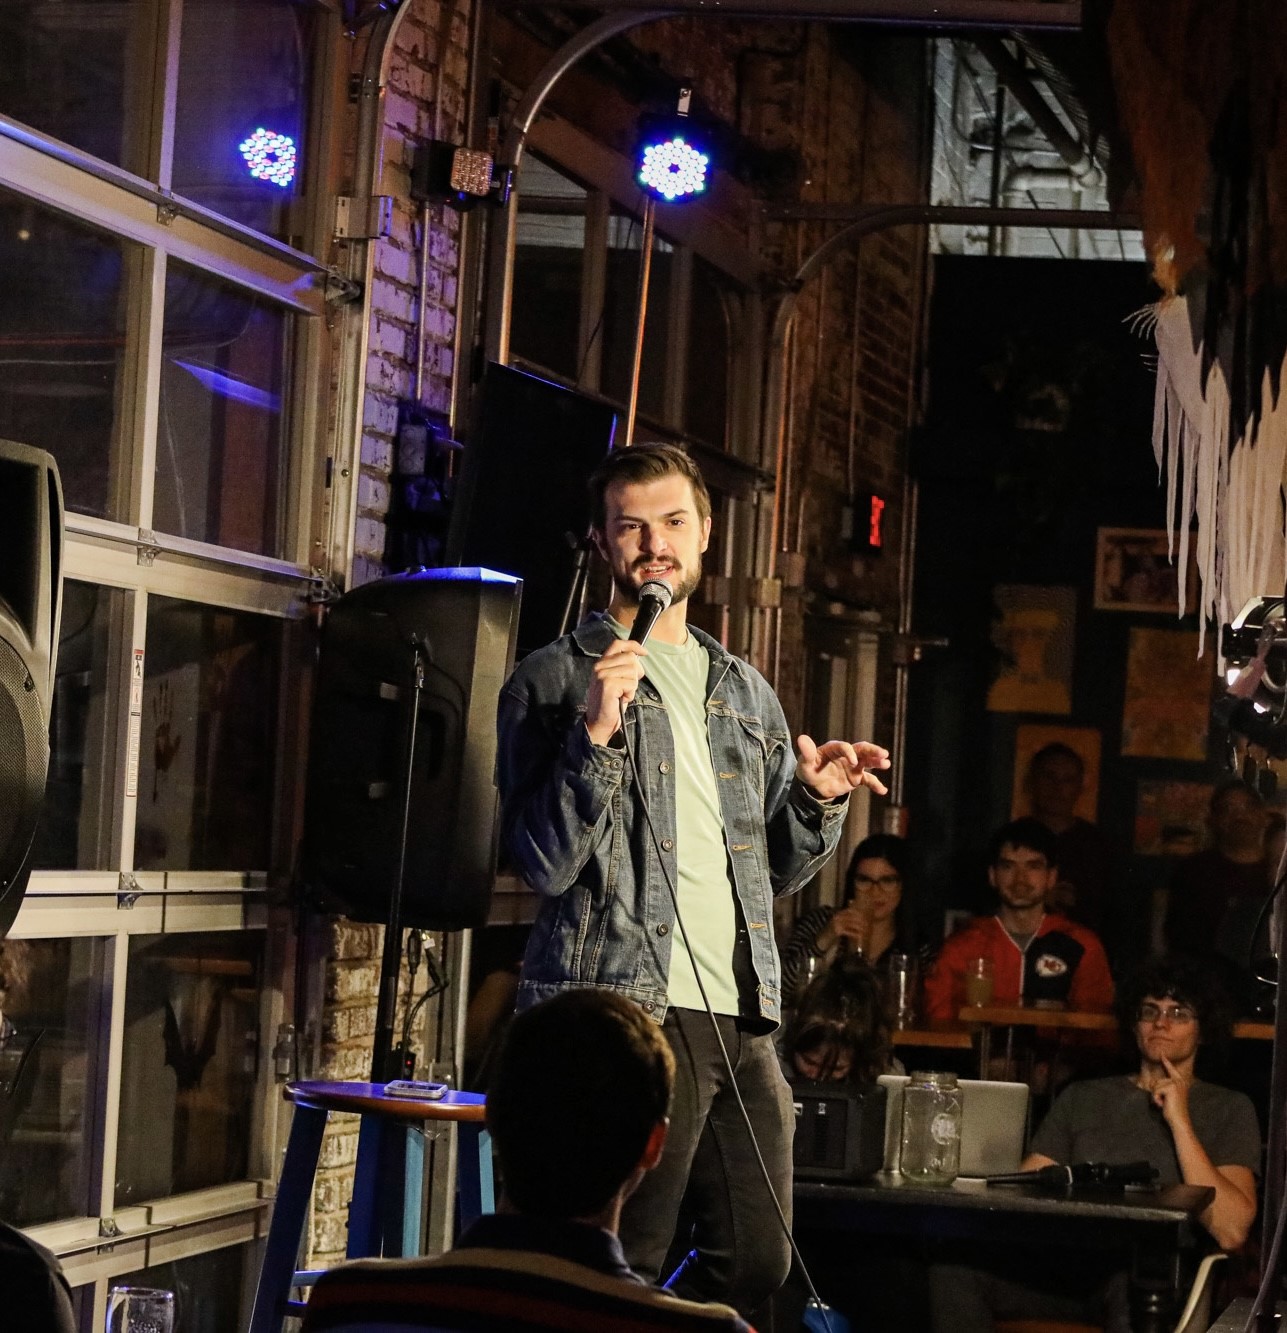 Tyler Ross - Thur. 8:00PM Show Funny Stop Comedy Club on may. 23, 20:00@Funny Stop Comedy Club - Compra entradas y obtén información enFunny Stop funnystop.online